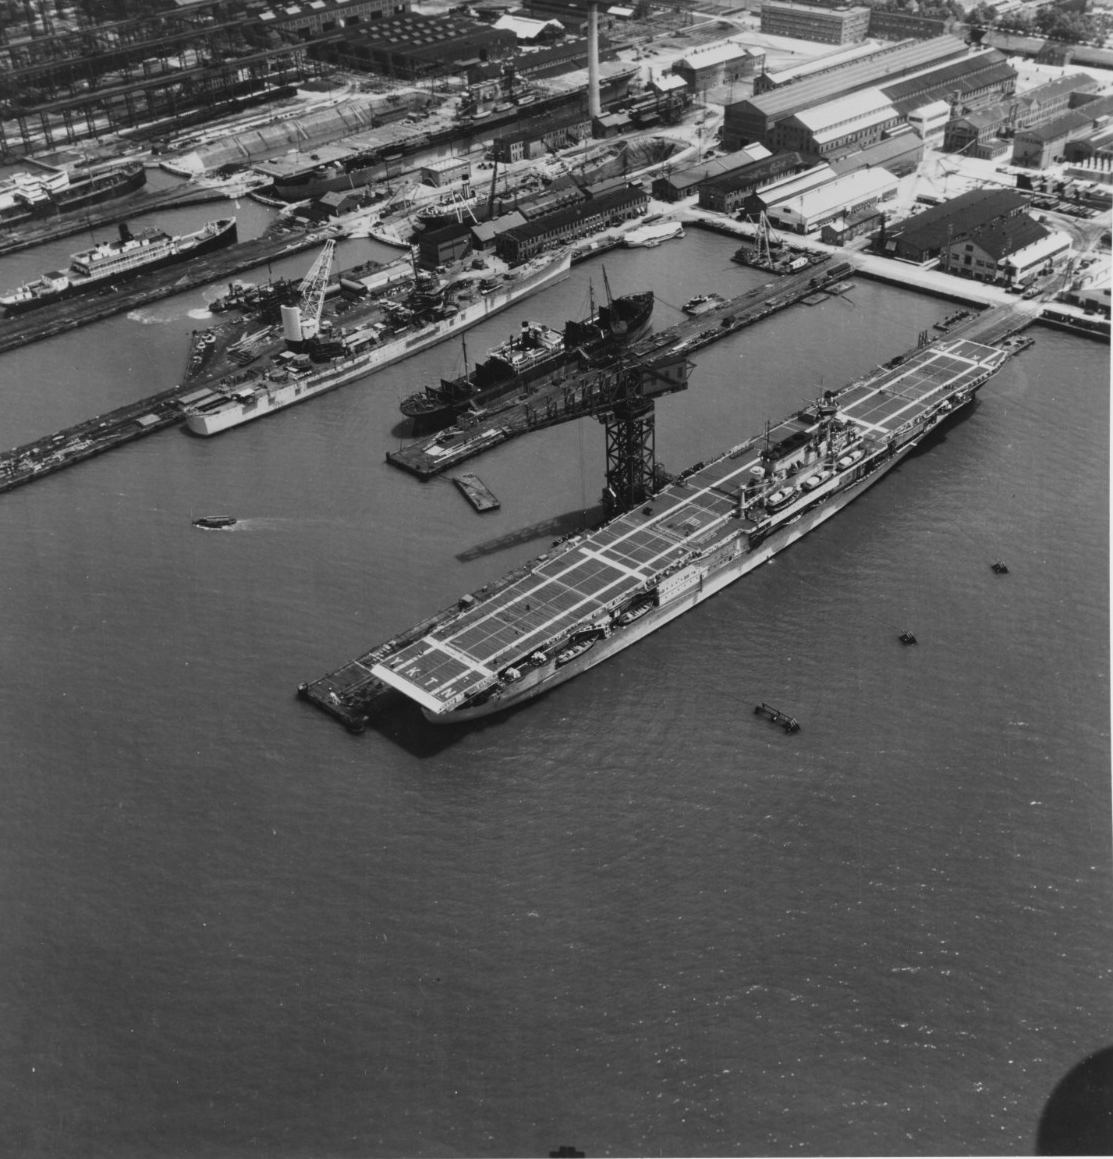 The USS Yorktown (CV-5, foreground) in June 1937, preparing for sea trials at Newport News Shipbuilding, while the Enterprise (CV-6) is fitting out in a drydock (upper center). Both carriers were purchased far in advance of World War II and playe...